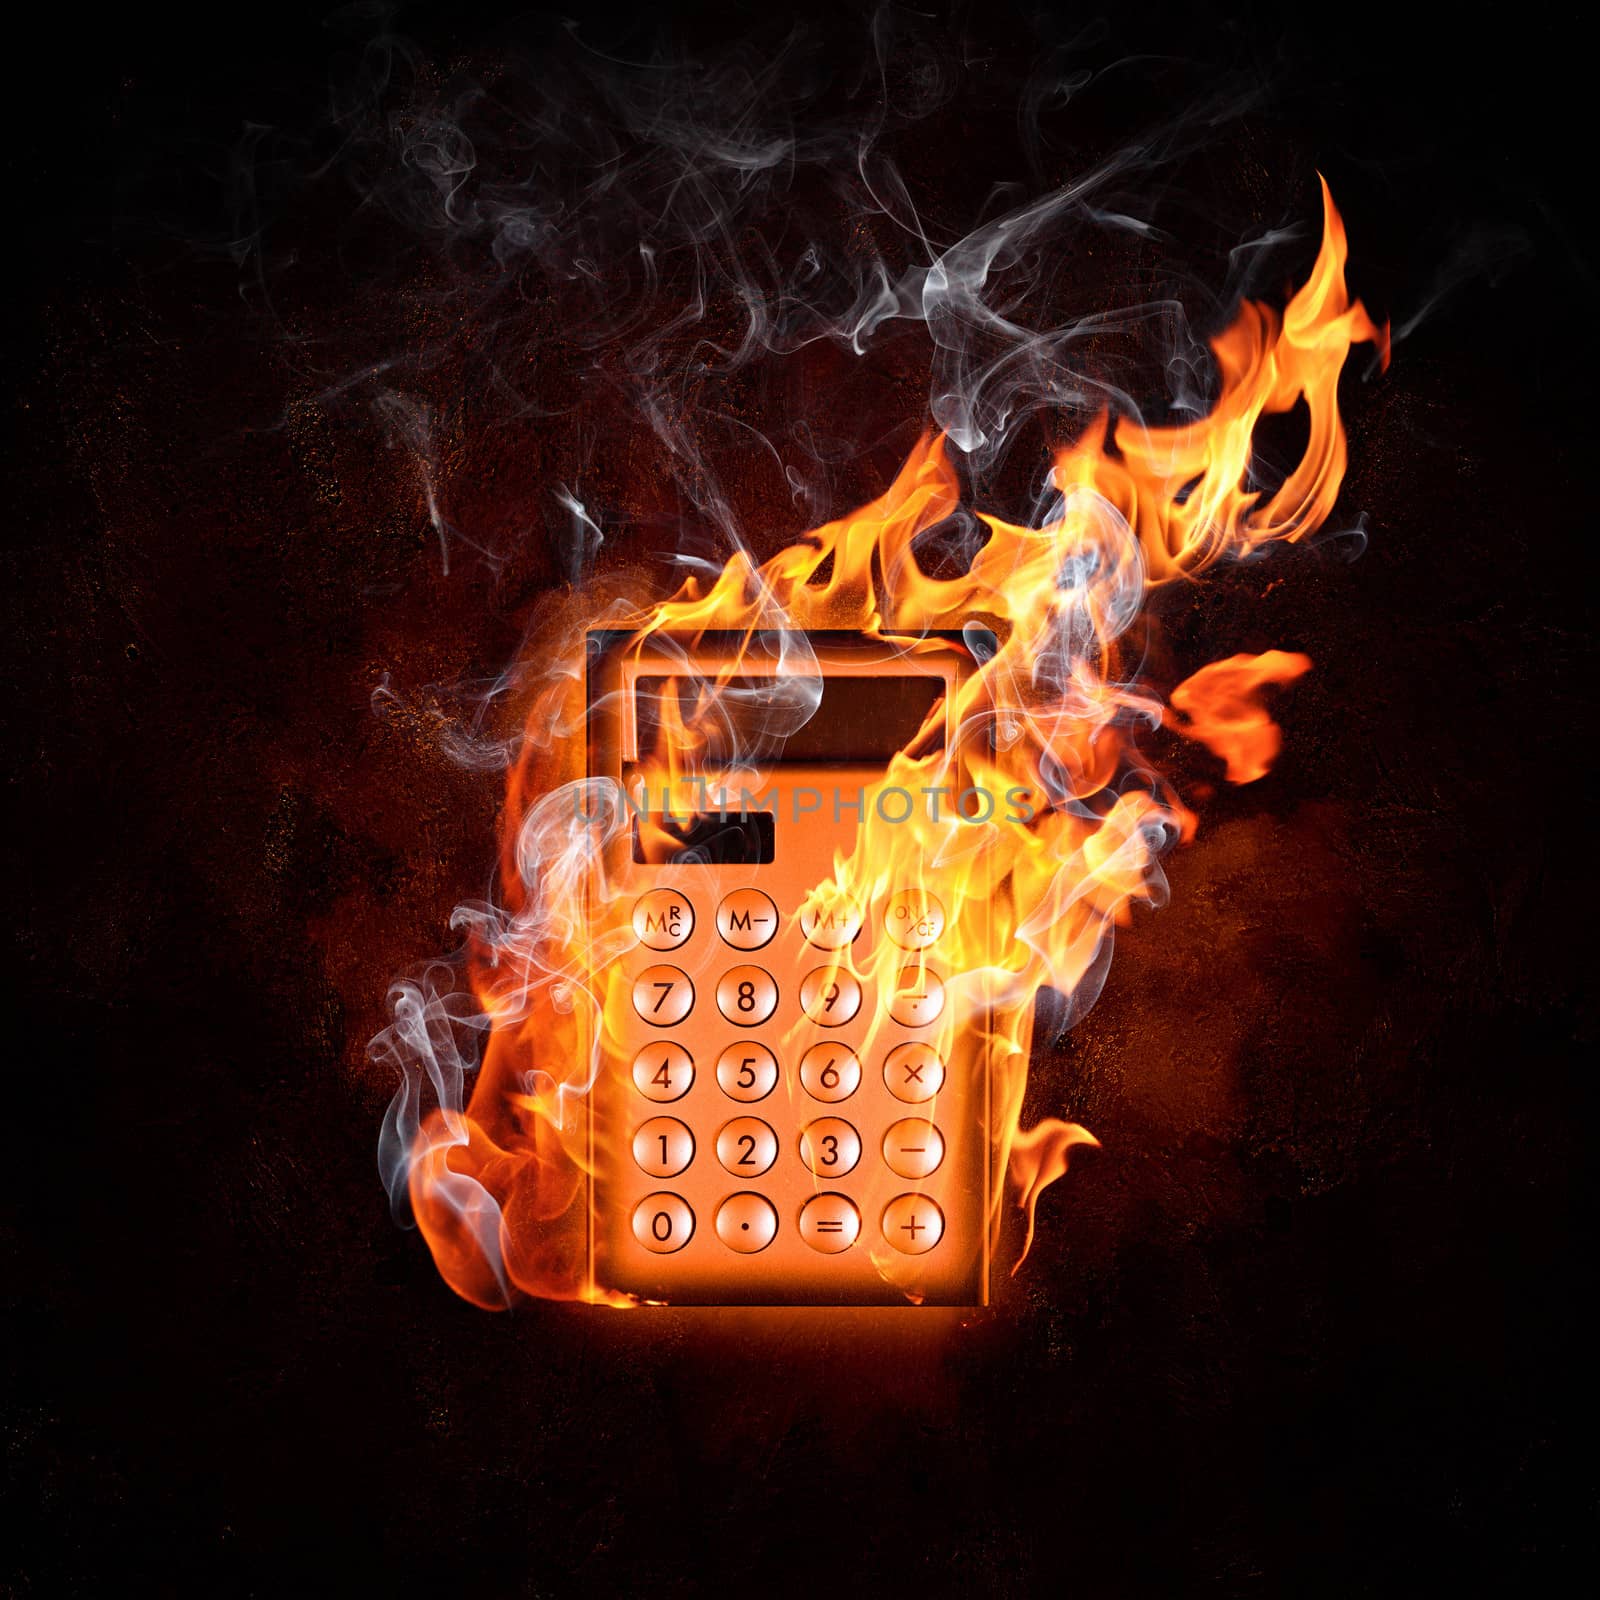 Calculator in fire by sergey_nivens